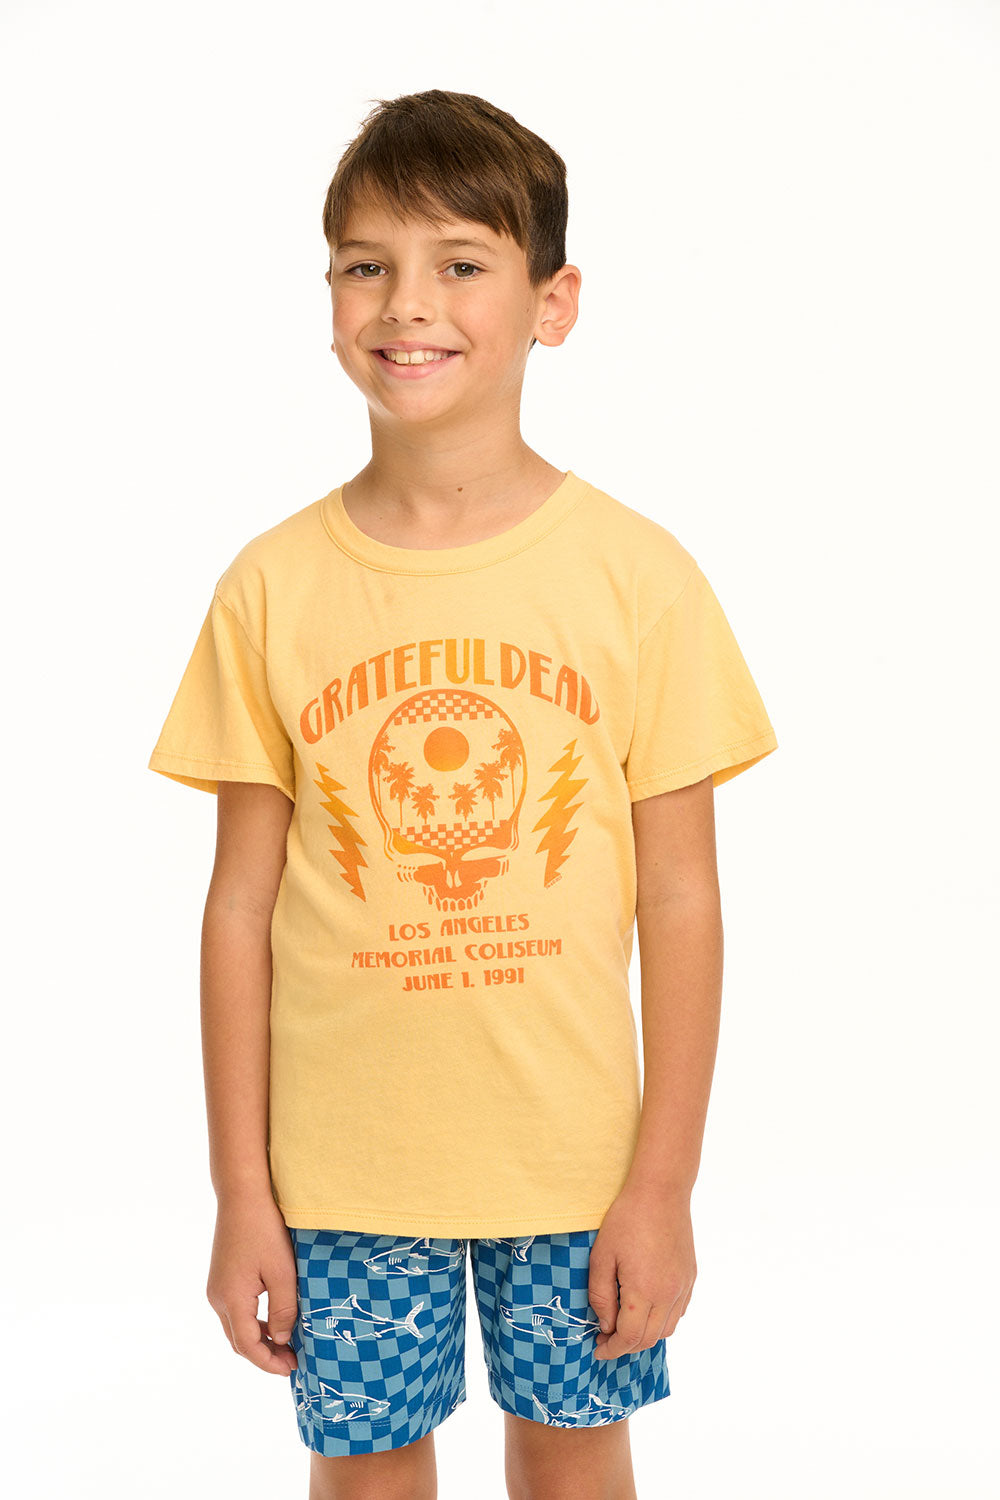 Grateful Dead - Los Angeles Tee BOYS chaserbrand